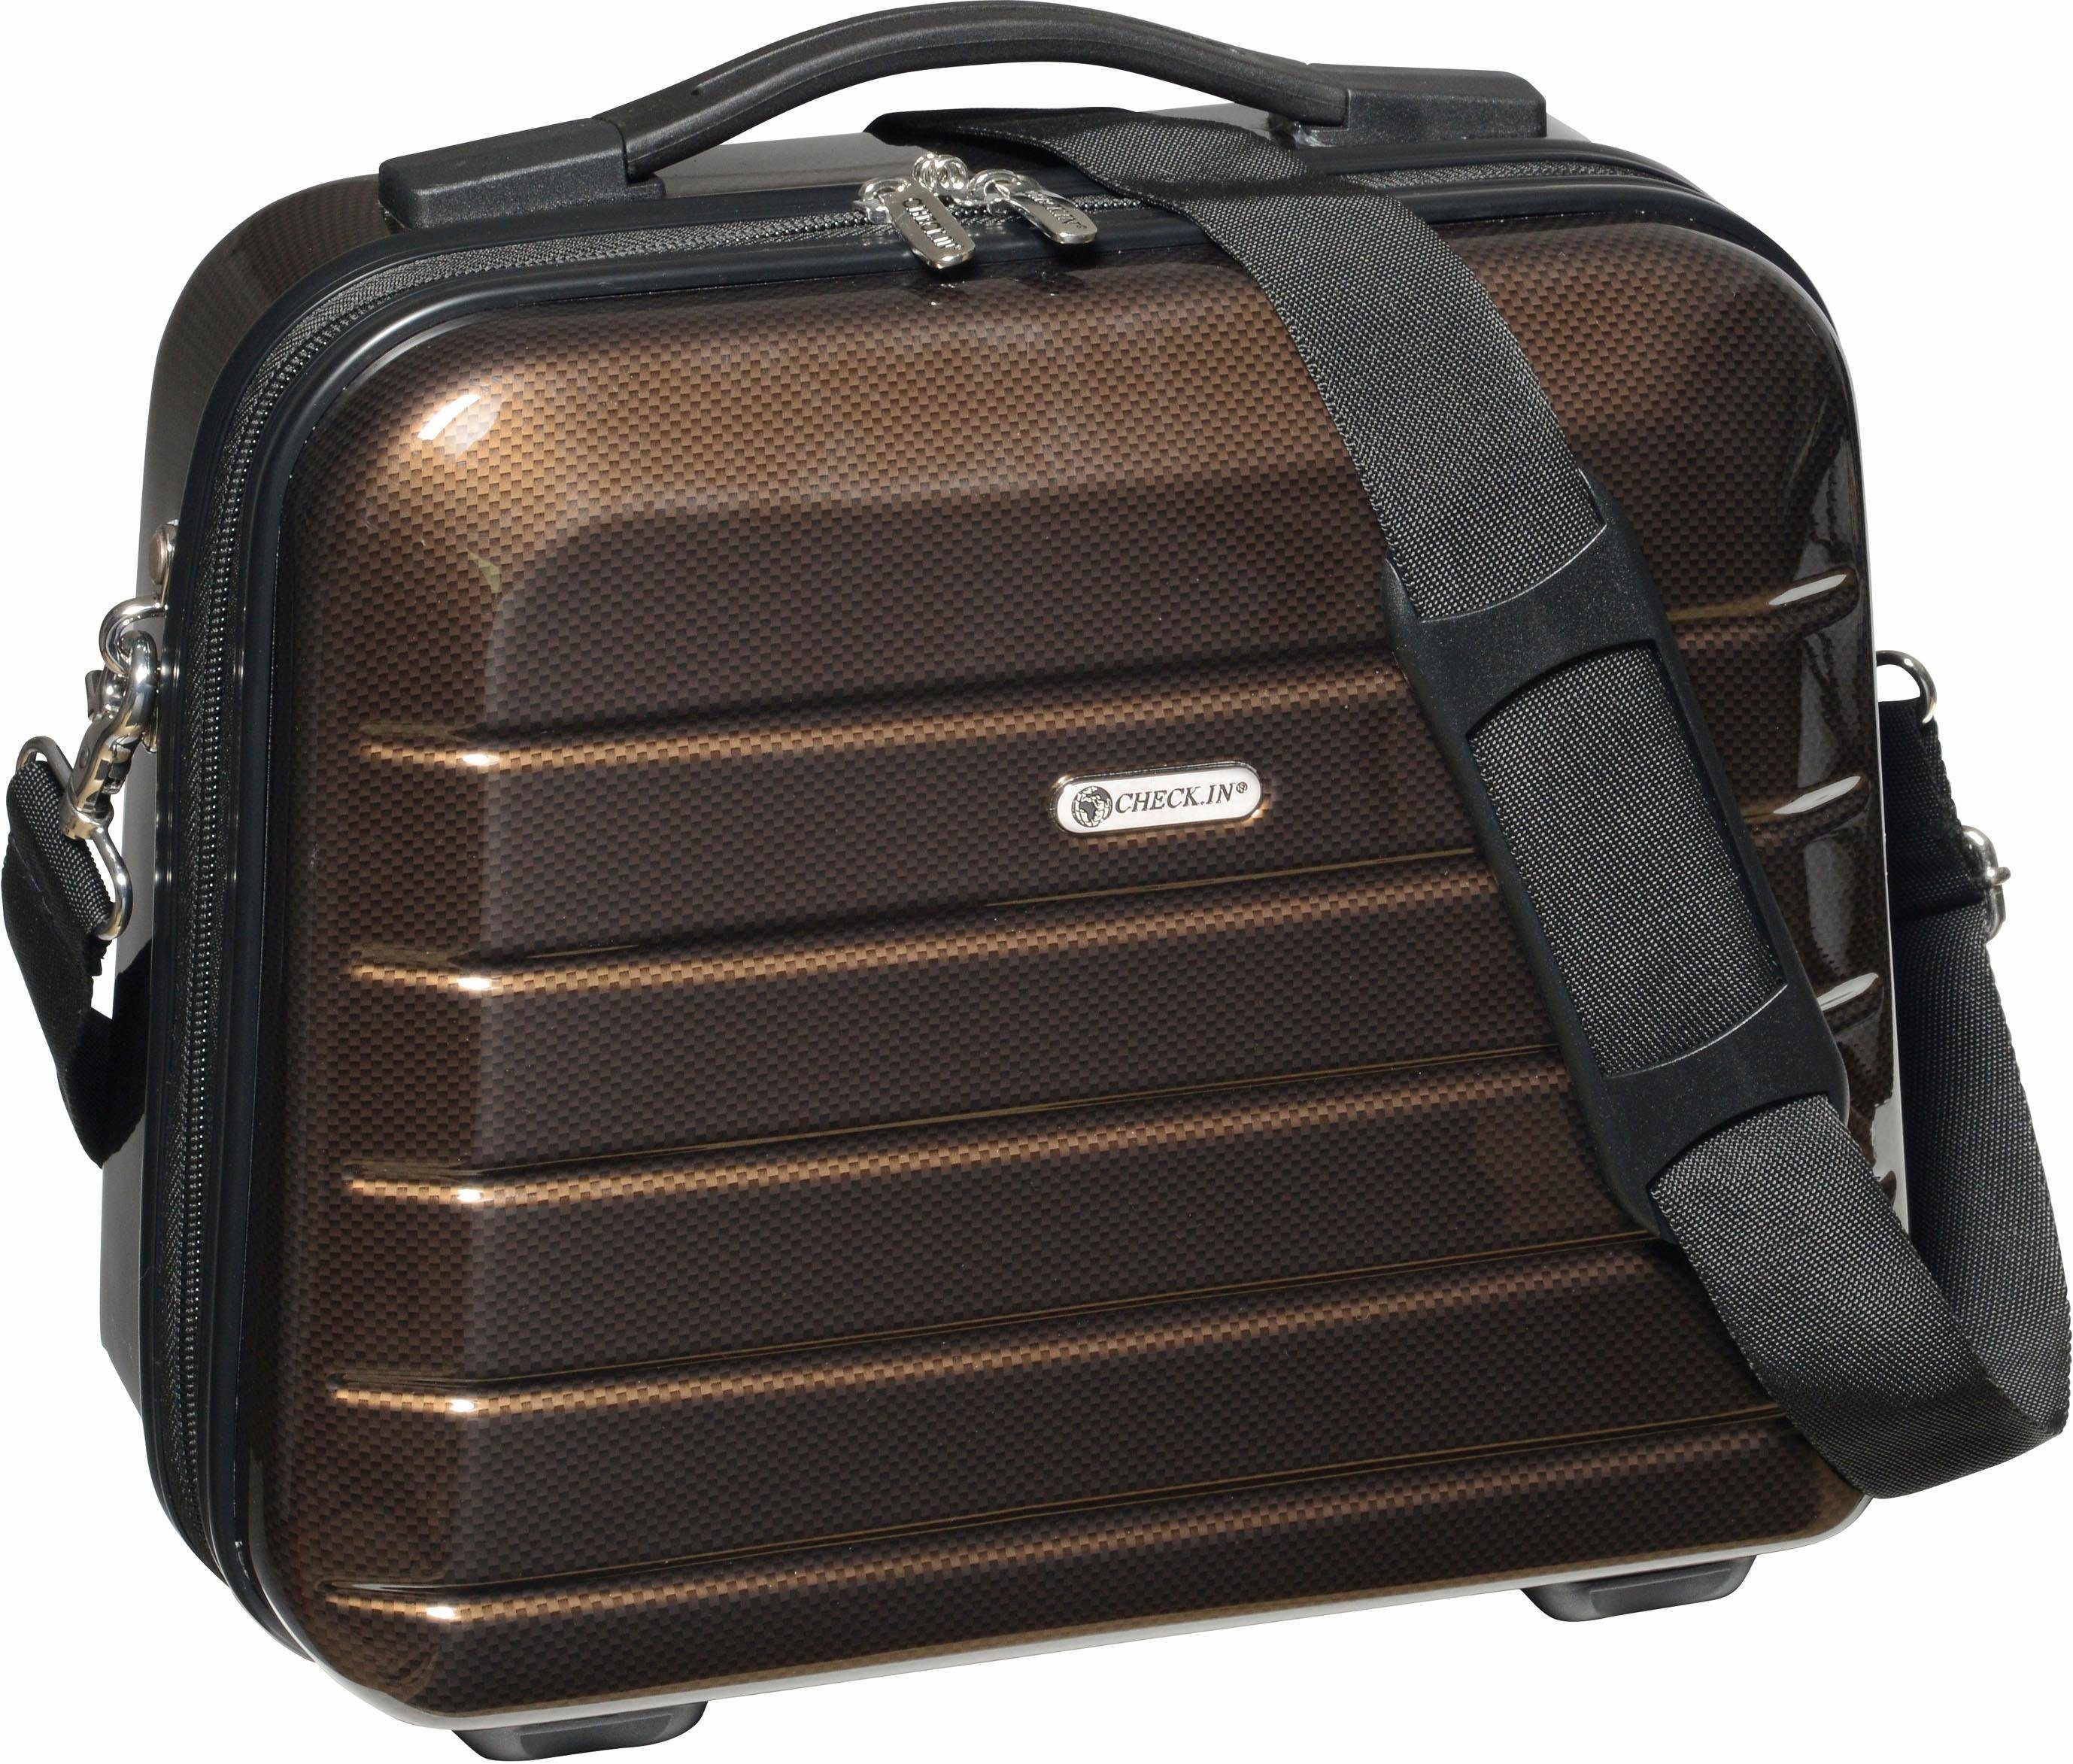 CHECK.IN® Beautycase London 2.0 carbon-champagner